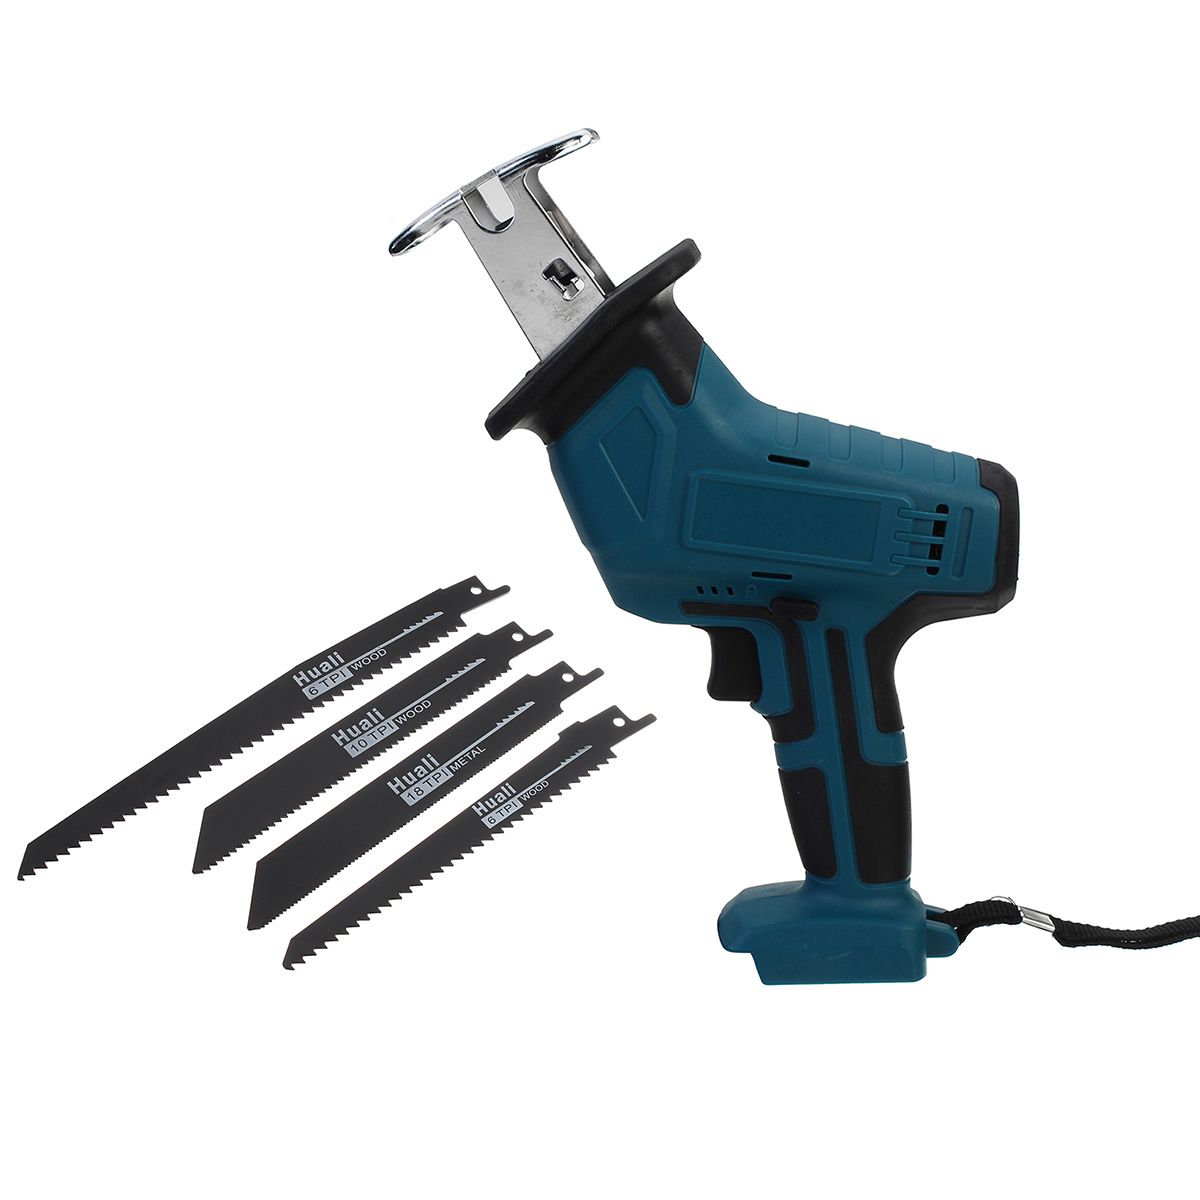 18V-10mm-Cordless-Electric-Reciprocating-Saw-Cutting-Tool-With-4xSaw-Blades-For-Makita-18V-Battery-1714893